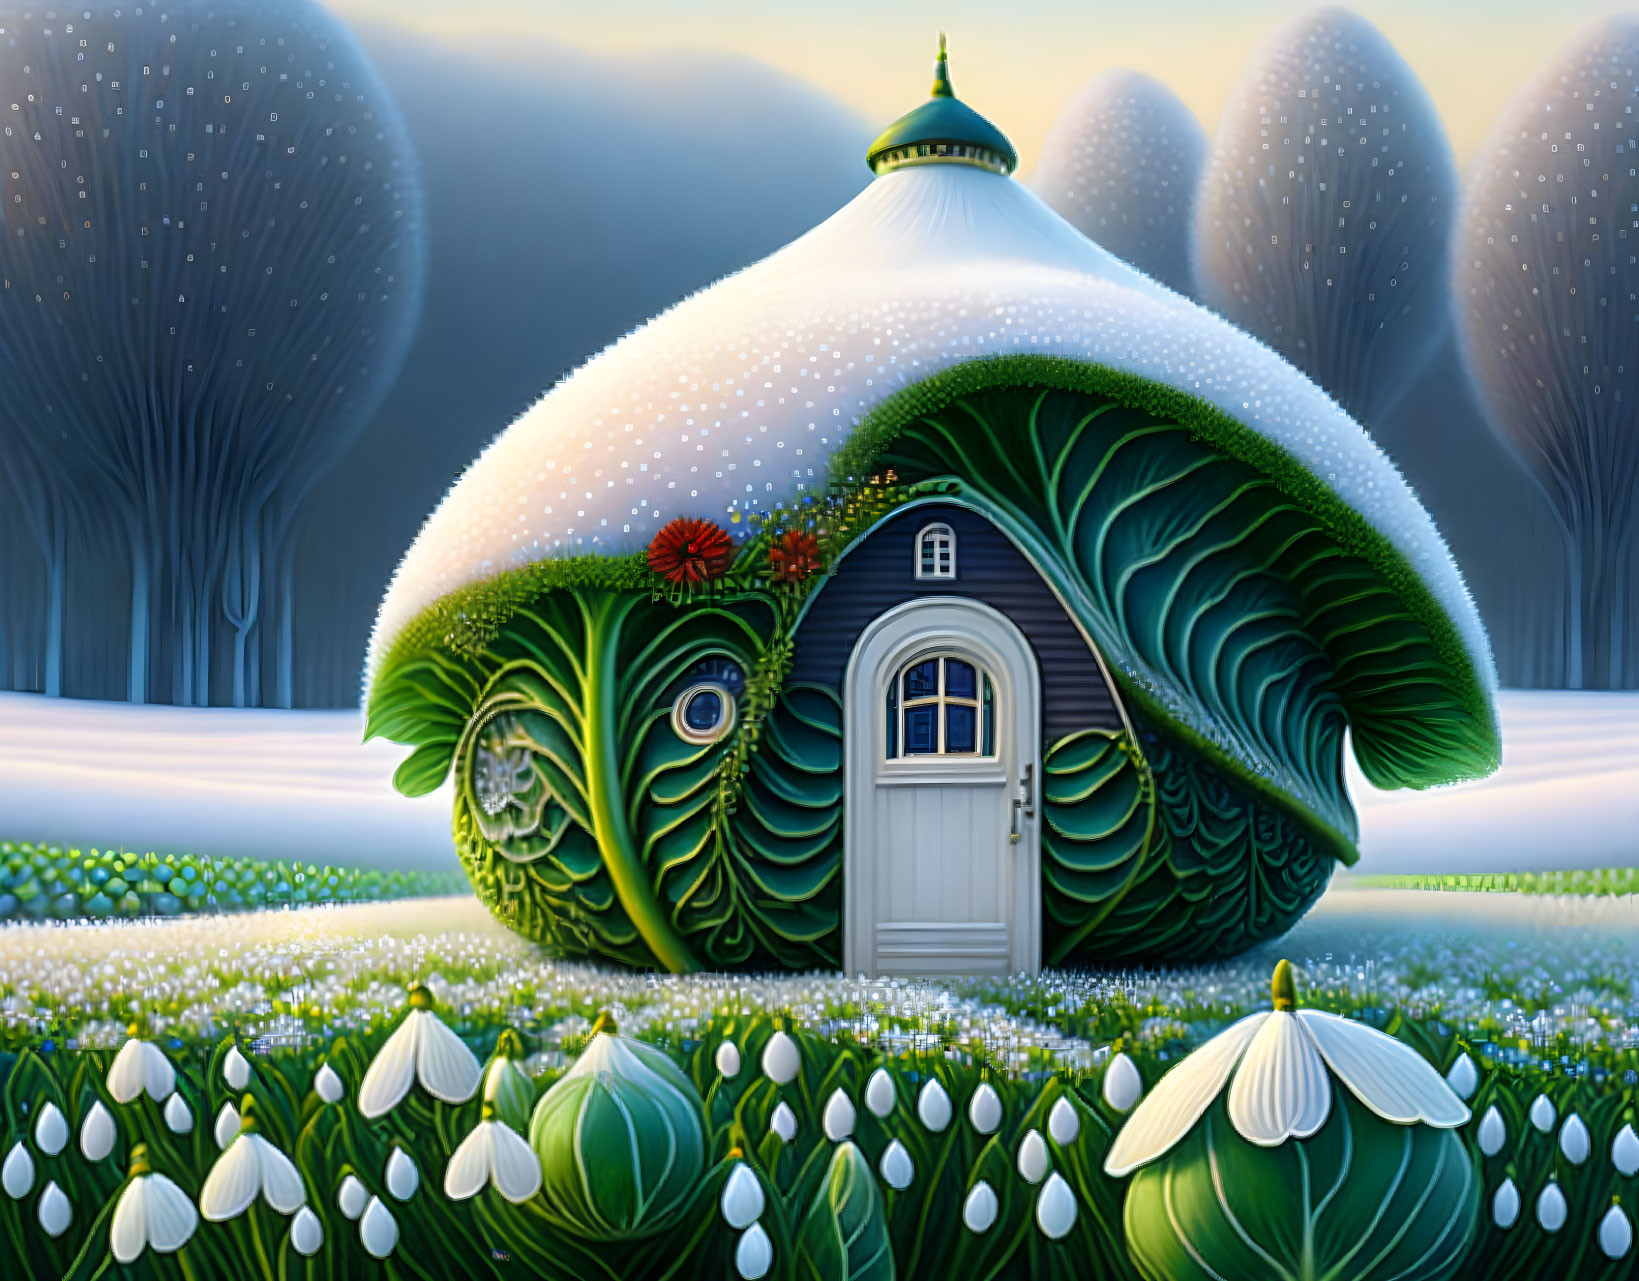 Enchanting large green mushroom house in mystical forest clearing